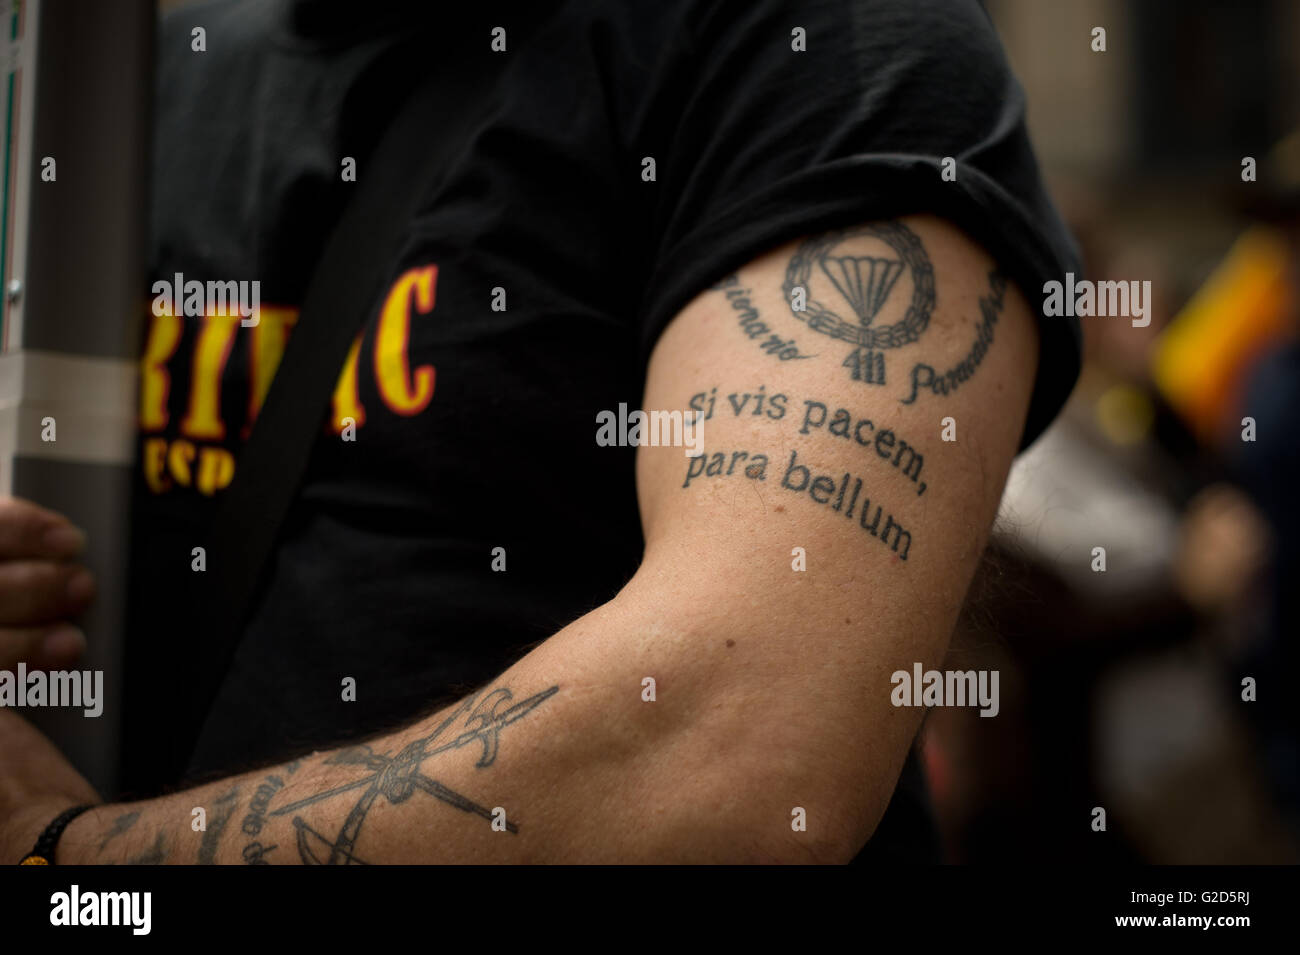 May 28, 2016 Barcelona, Catalonia, Spain - veteran army member of La Legion with a tattooed arm ( in latin language 'Si vis pacem, para bellum' meaning 'if you